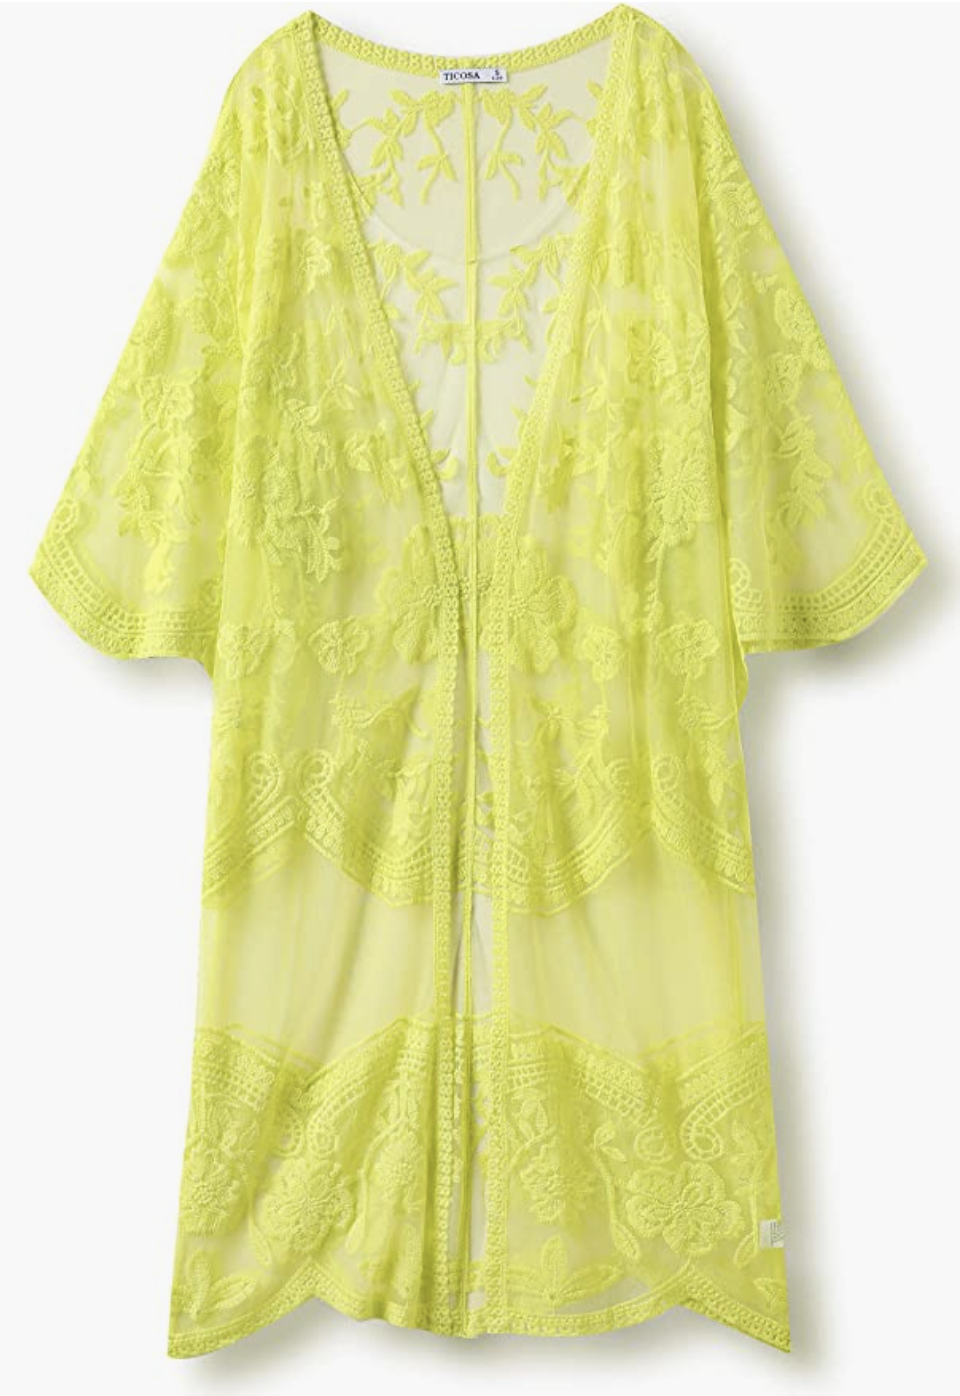 Neon Yellow Lace Beach Cover up